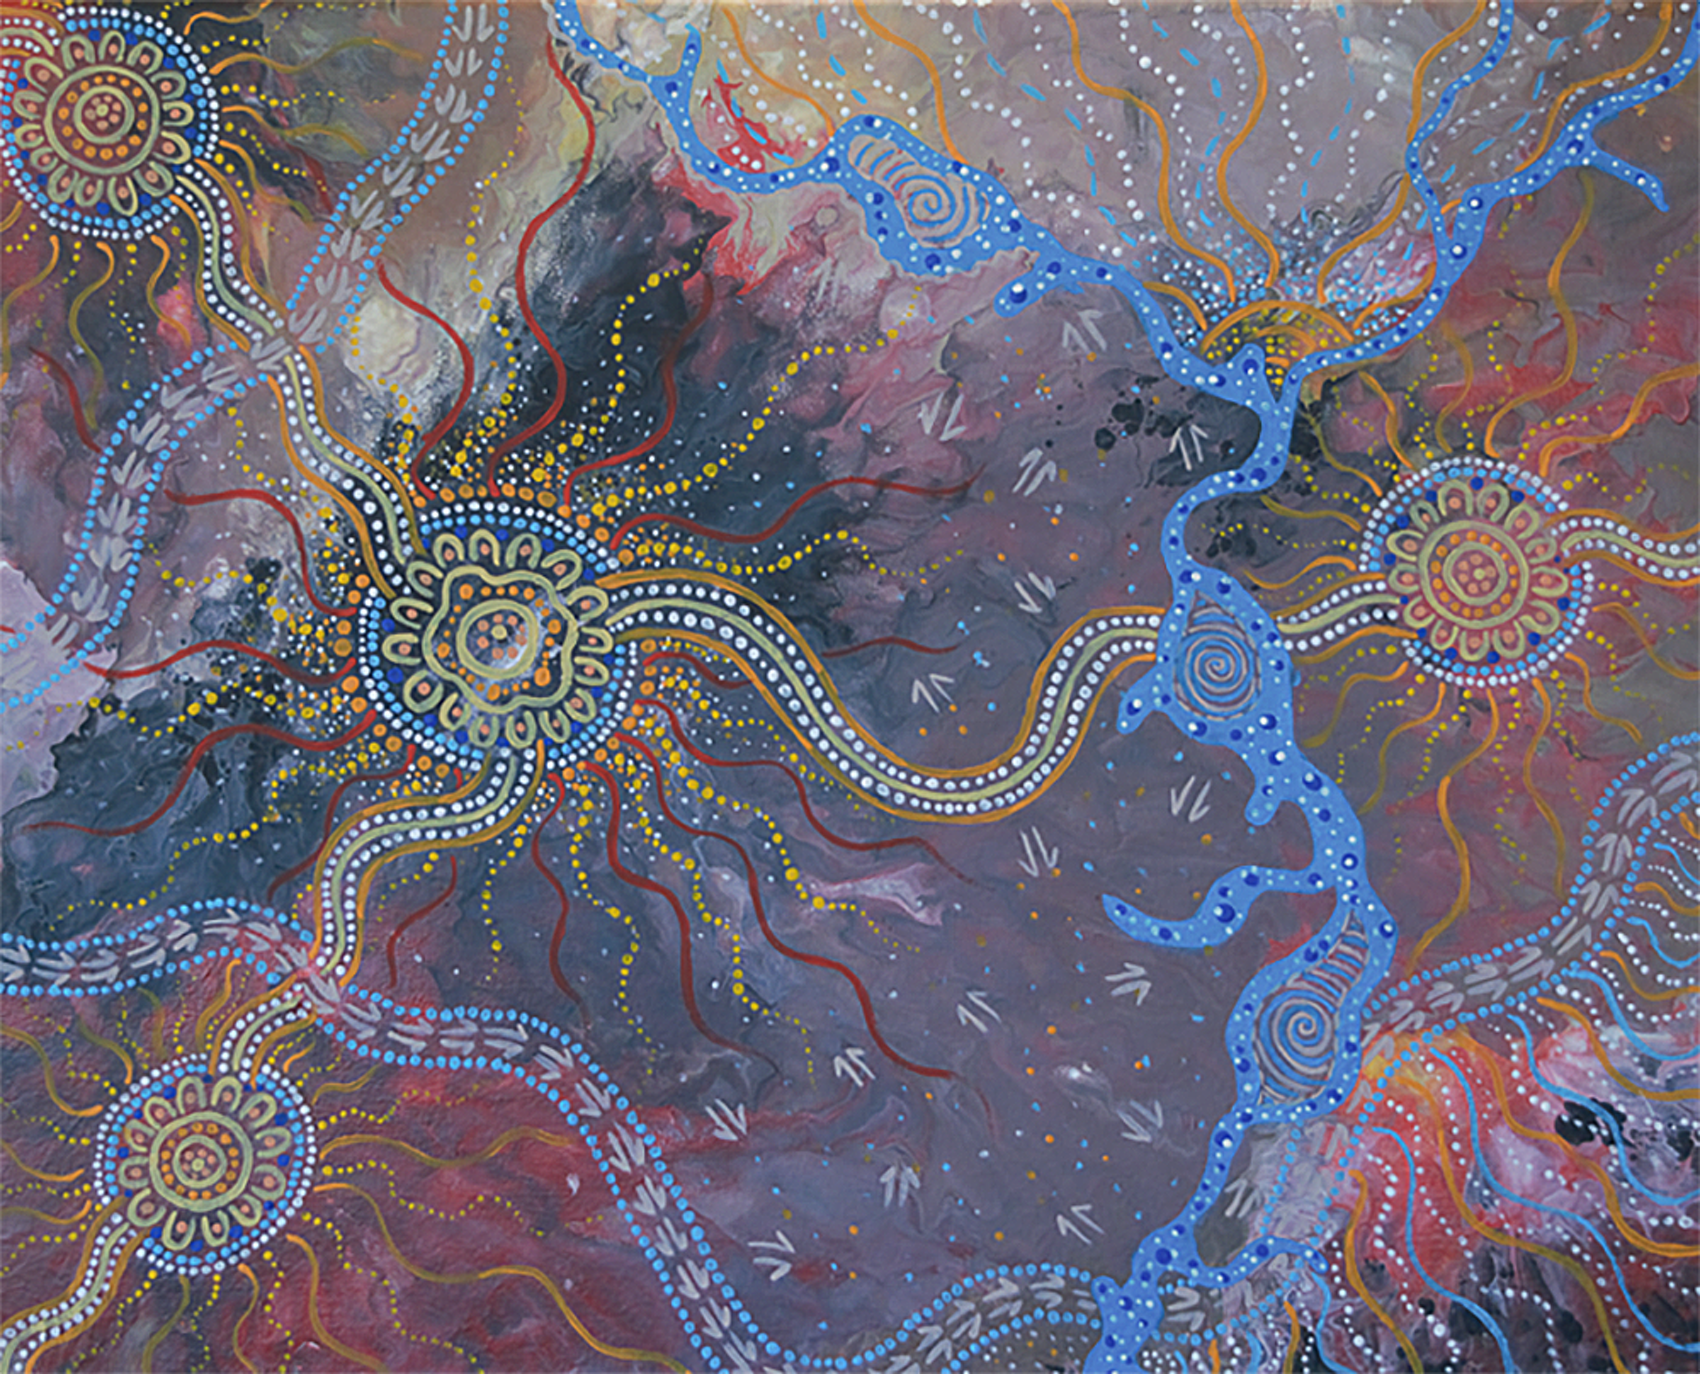 'Hunting Ground' by Natarsha Doyle. Traditional aboriginal dot painting techniques with a bright rainbow of colour. Art